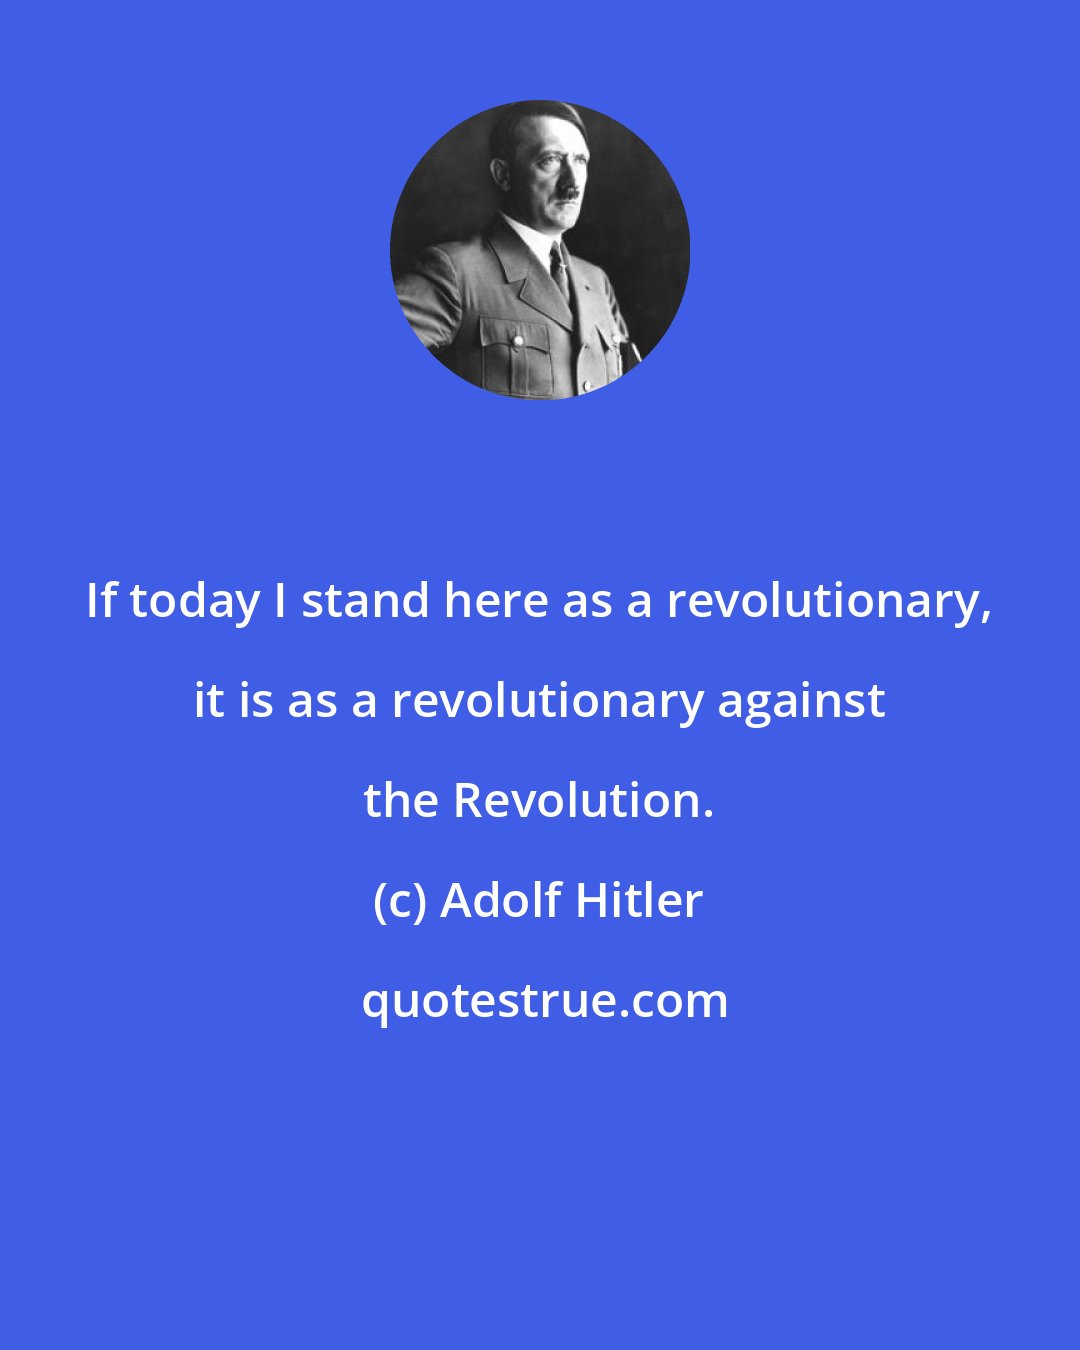 Adolf Hitler: If today I stand here as a revolutionary, it is as a revolutionary against the Revolution.